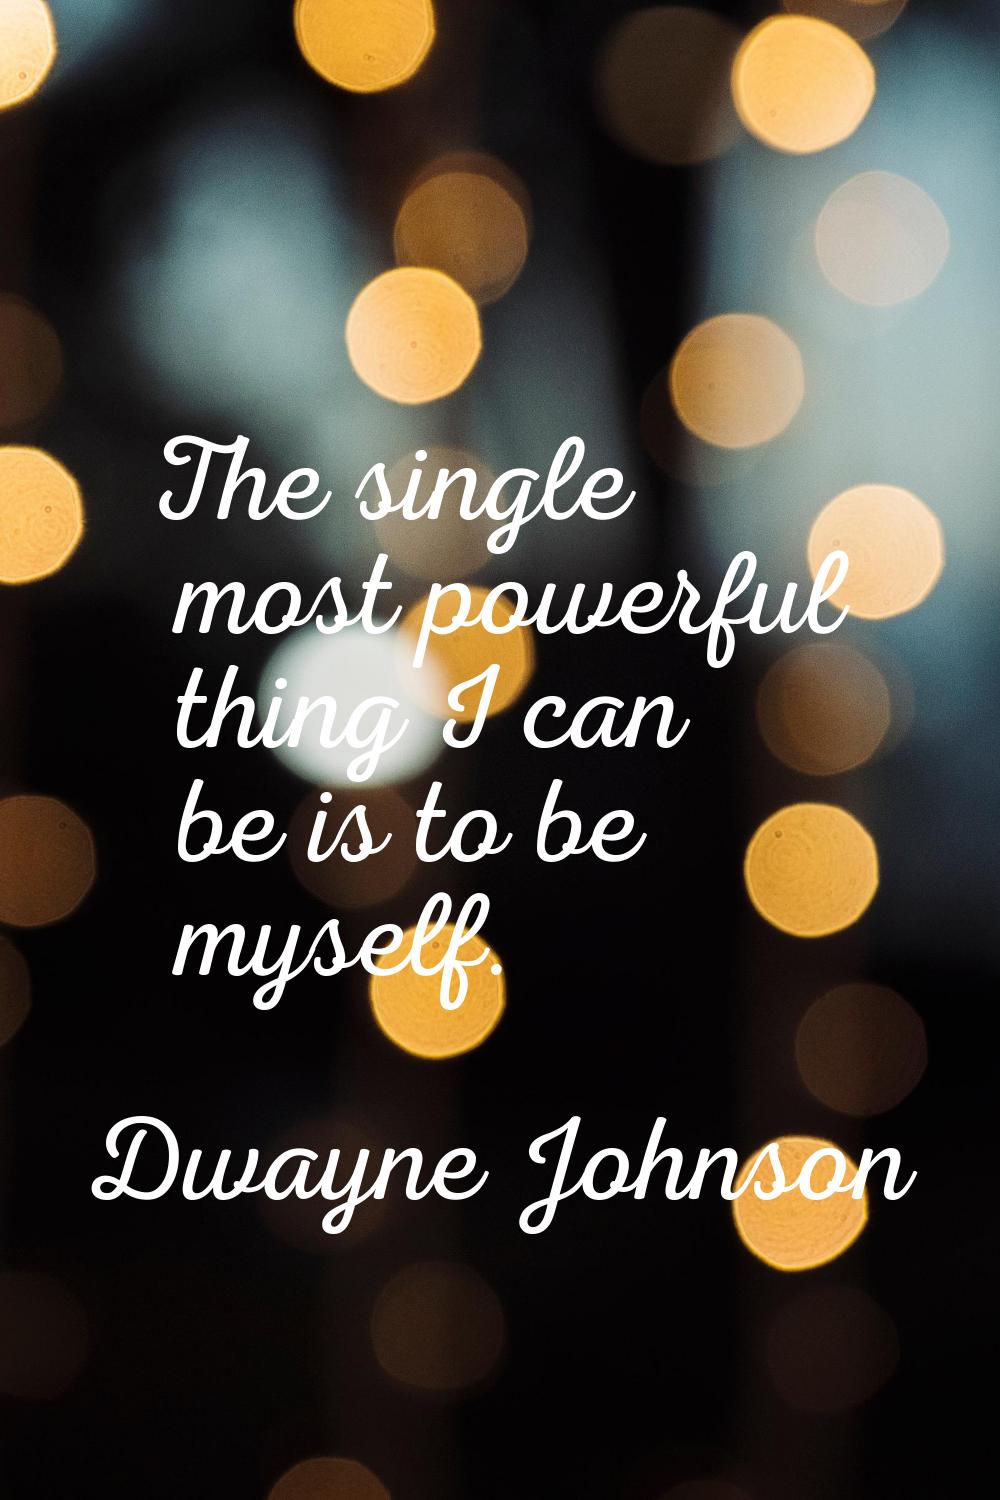 The single most powerful thing I can be is to be myself.